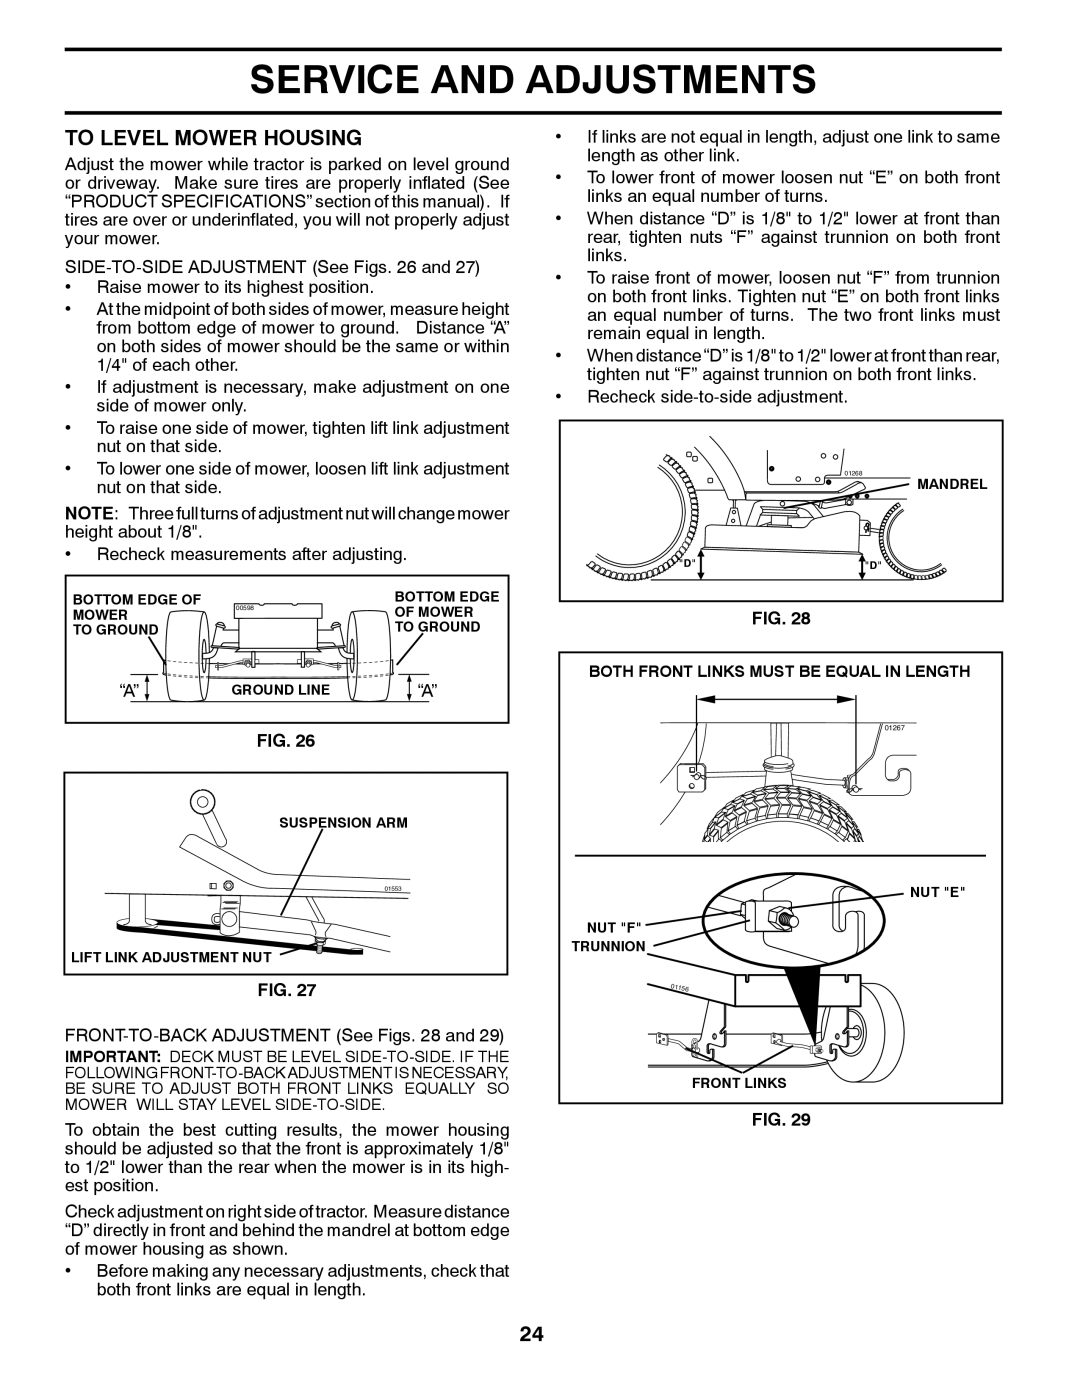 Husqvarna CTH2036 XP owner manual To Level Mower Housing, Service And Adjustments 